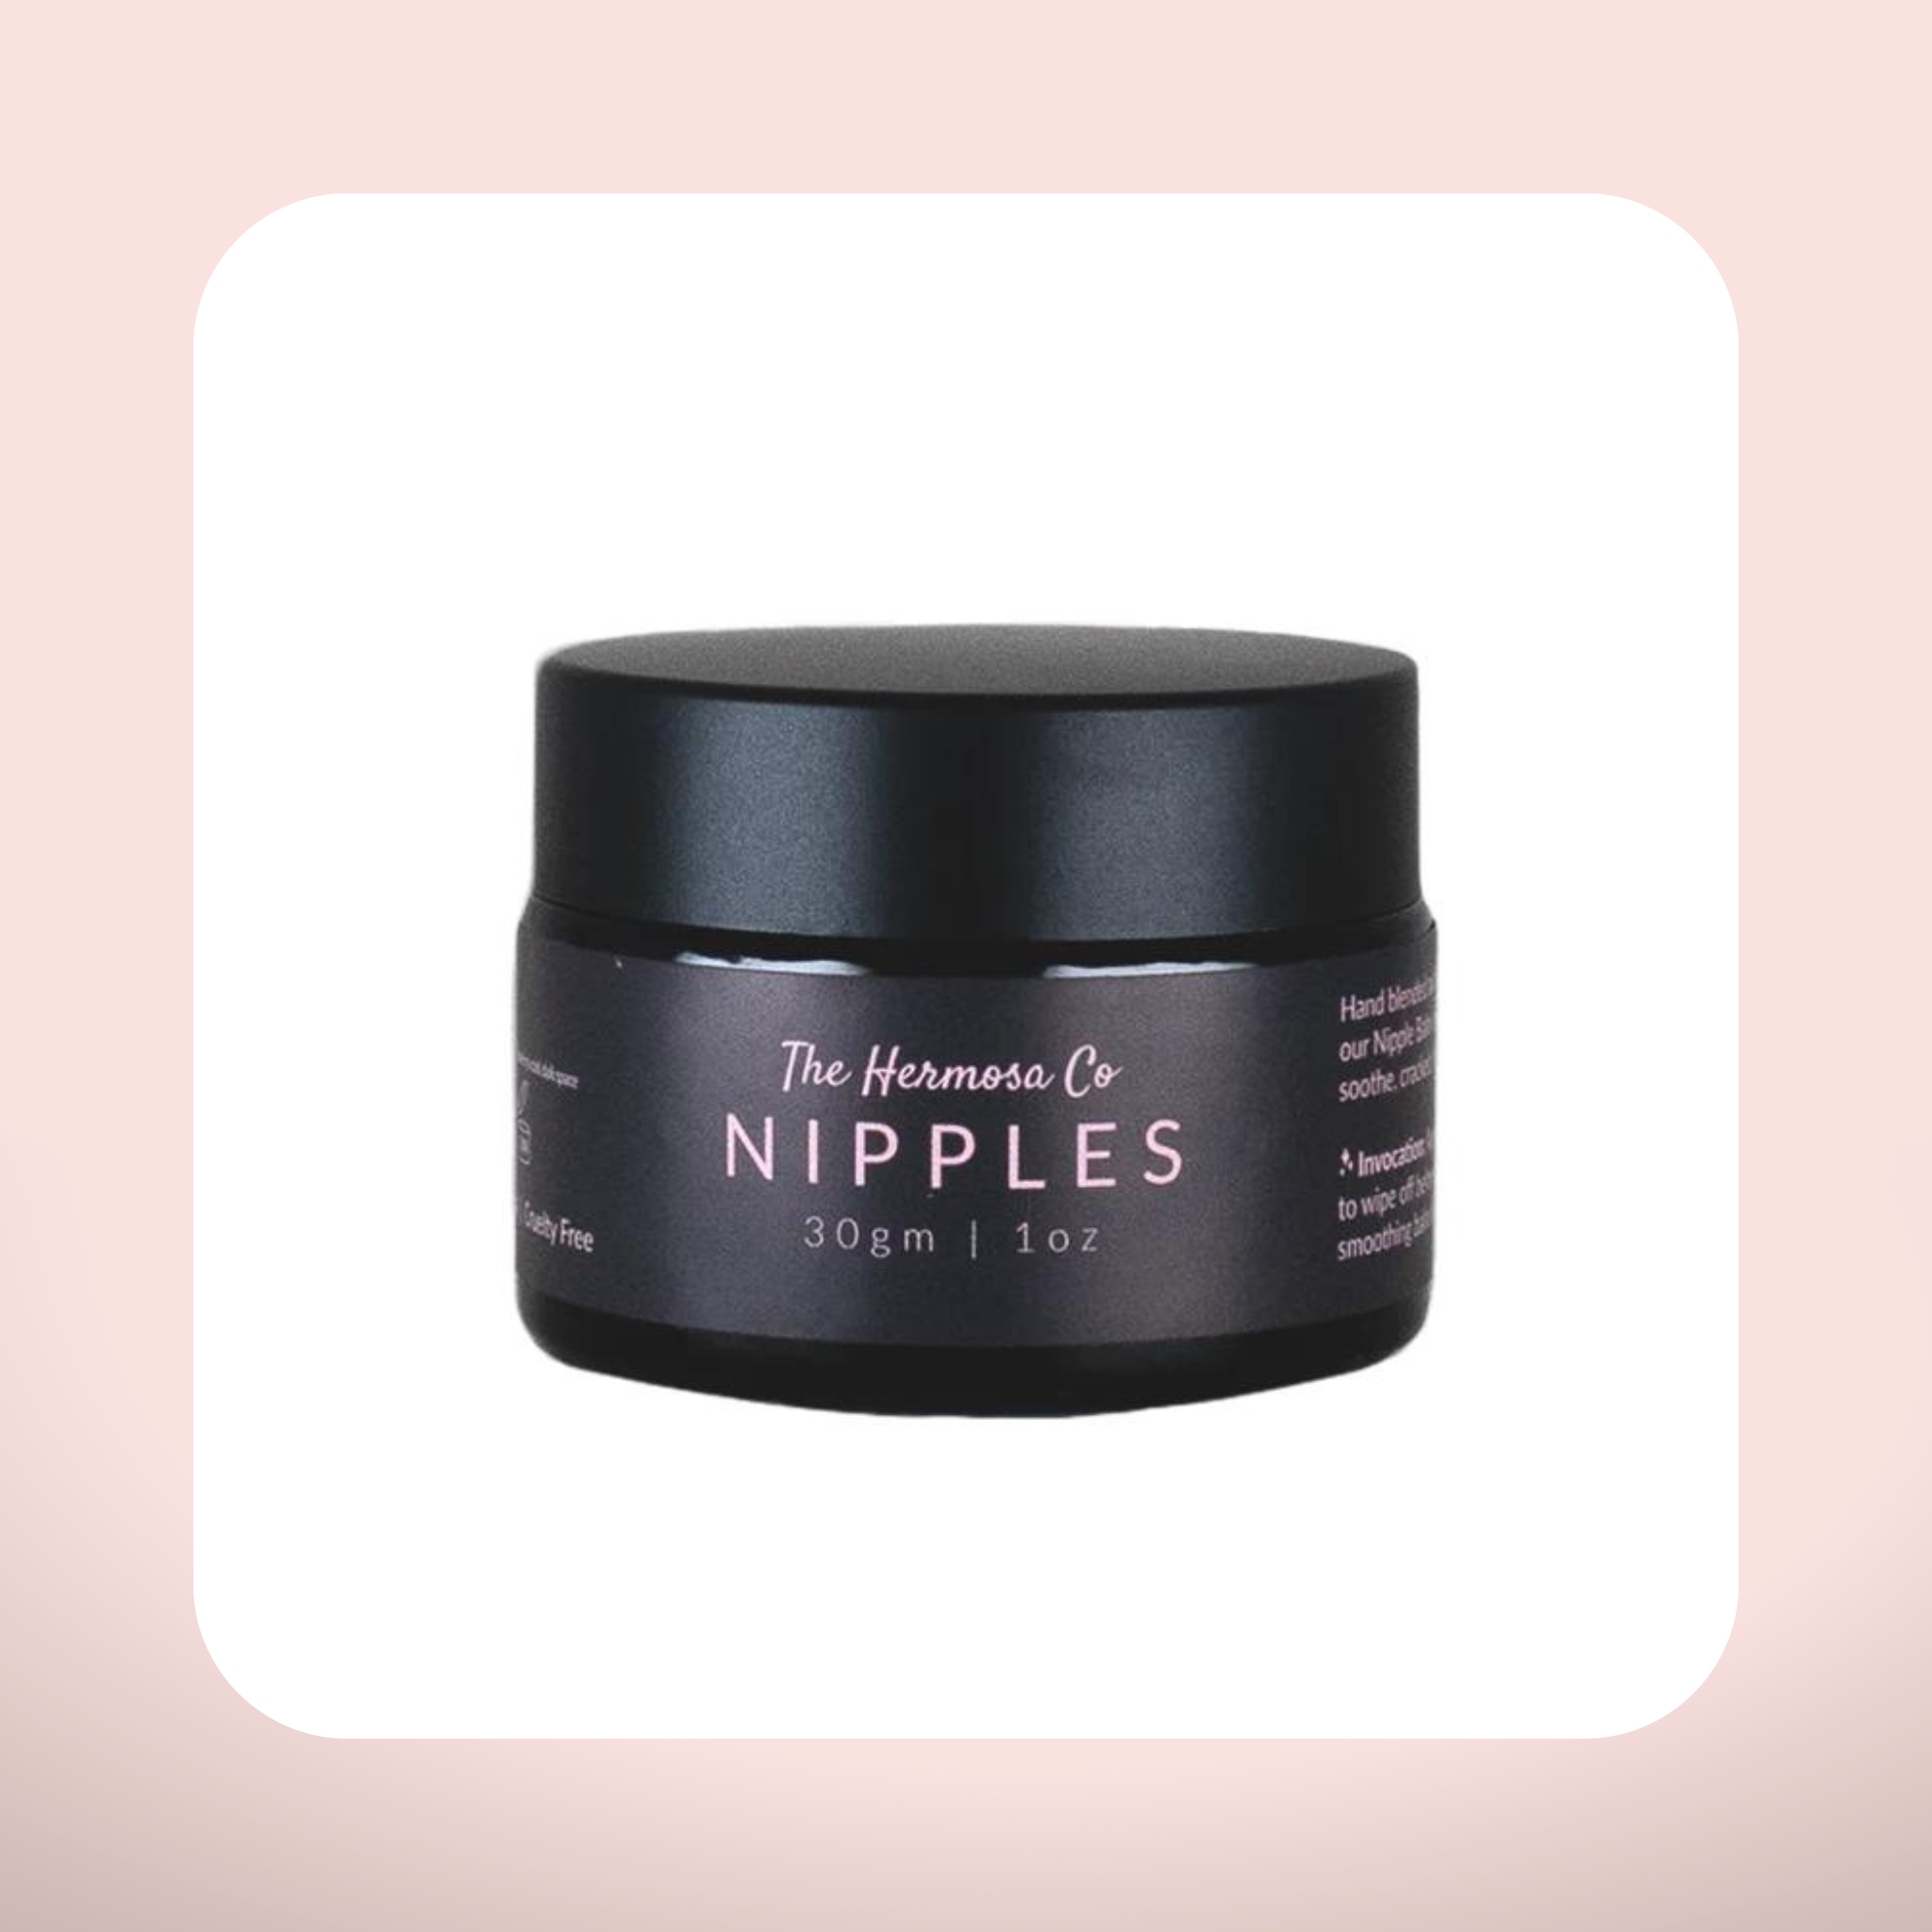 Nipples balm by The Hermosa Co.